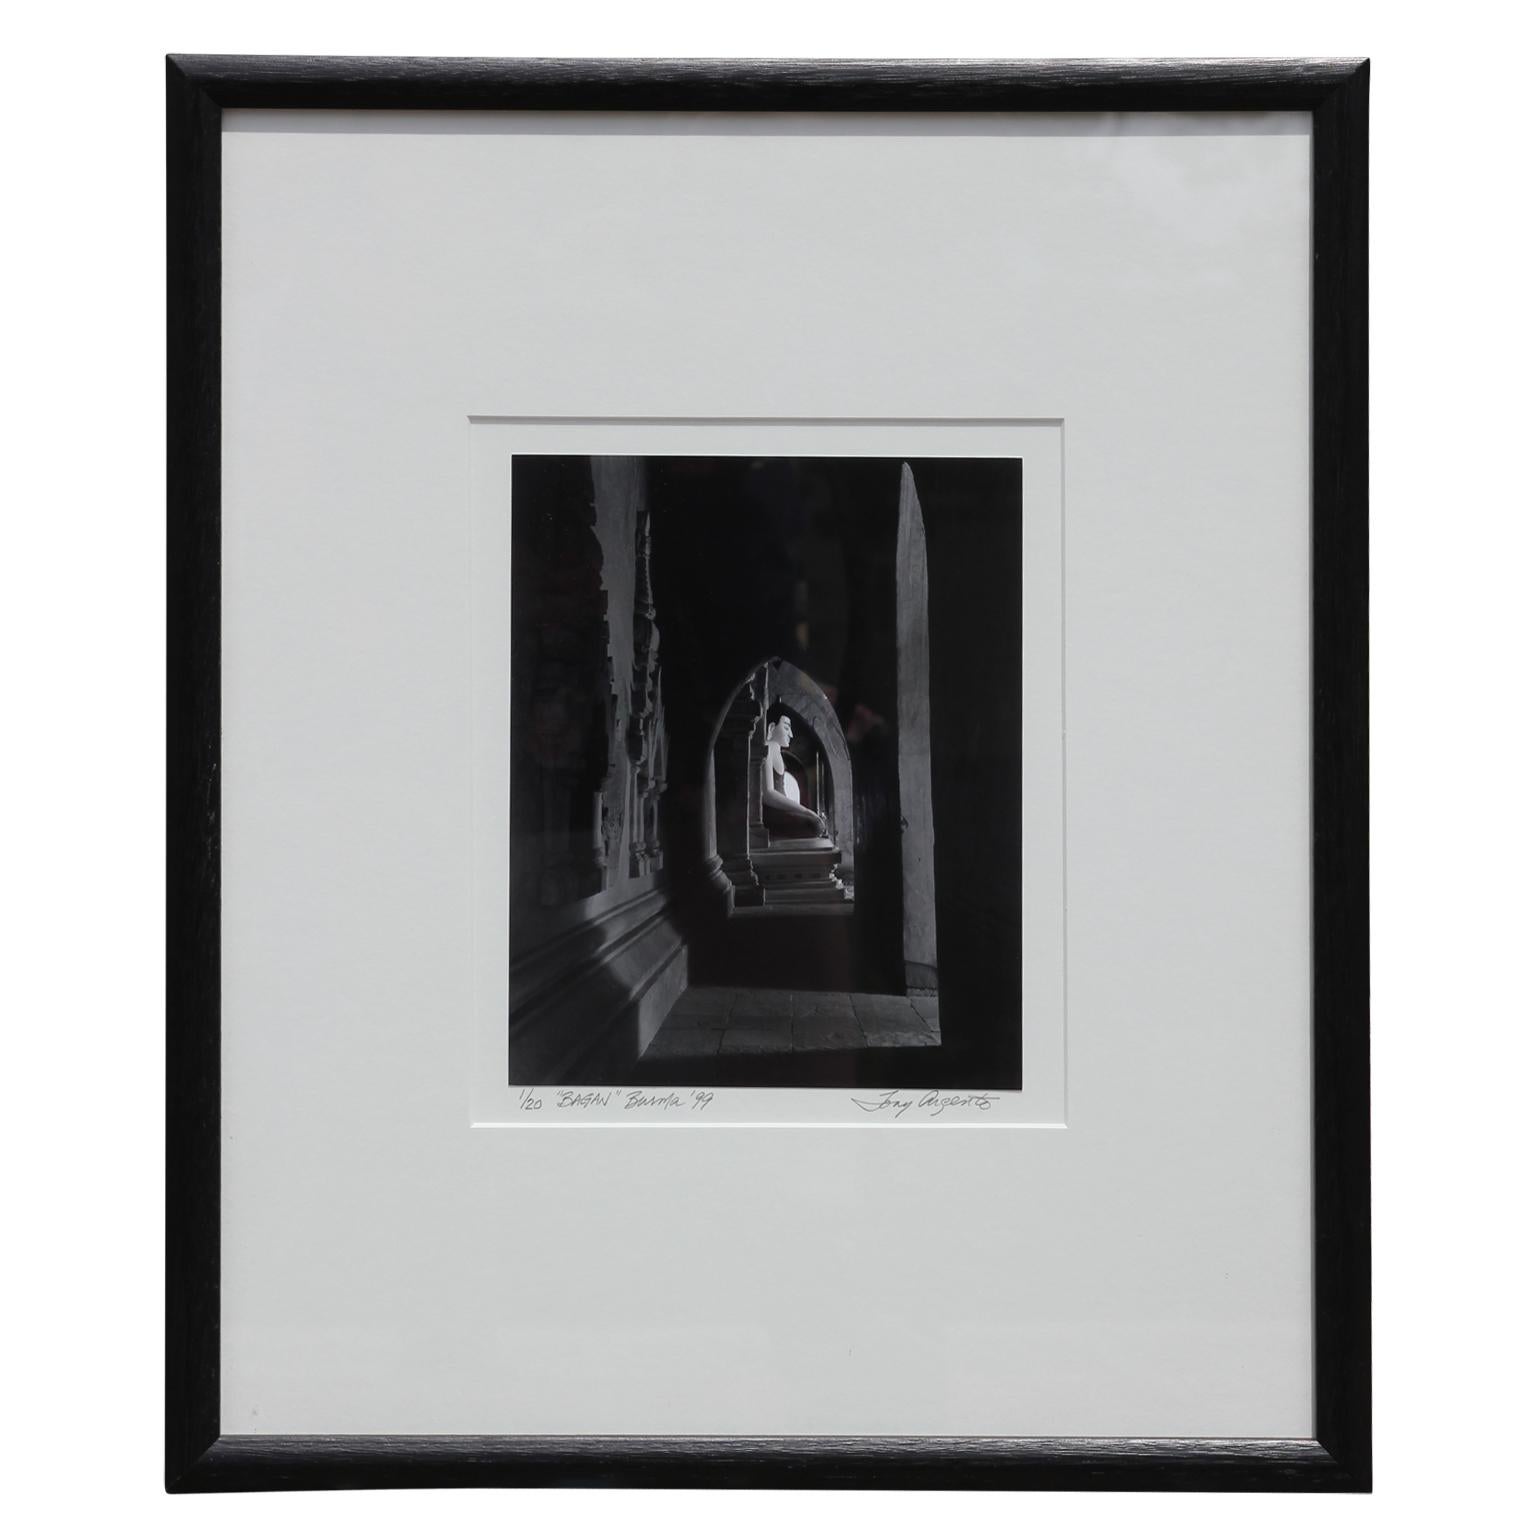 Buddhism in Burma is practiced by 90% of the country's population is predominantly of the Theravada tradition. This image of the Buddha was captured at one fo the countless temples in Bagan area of Burma. The photograph is professionally dry-mounted